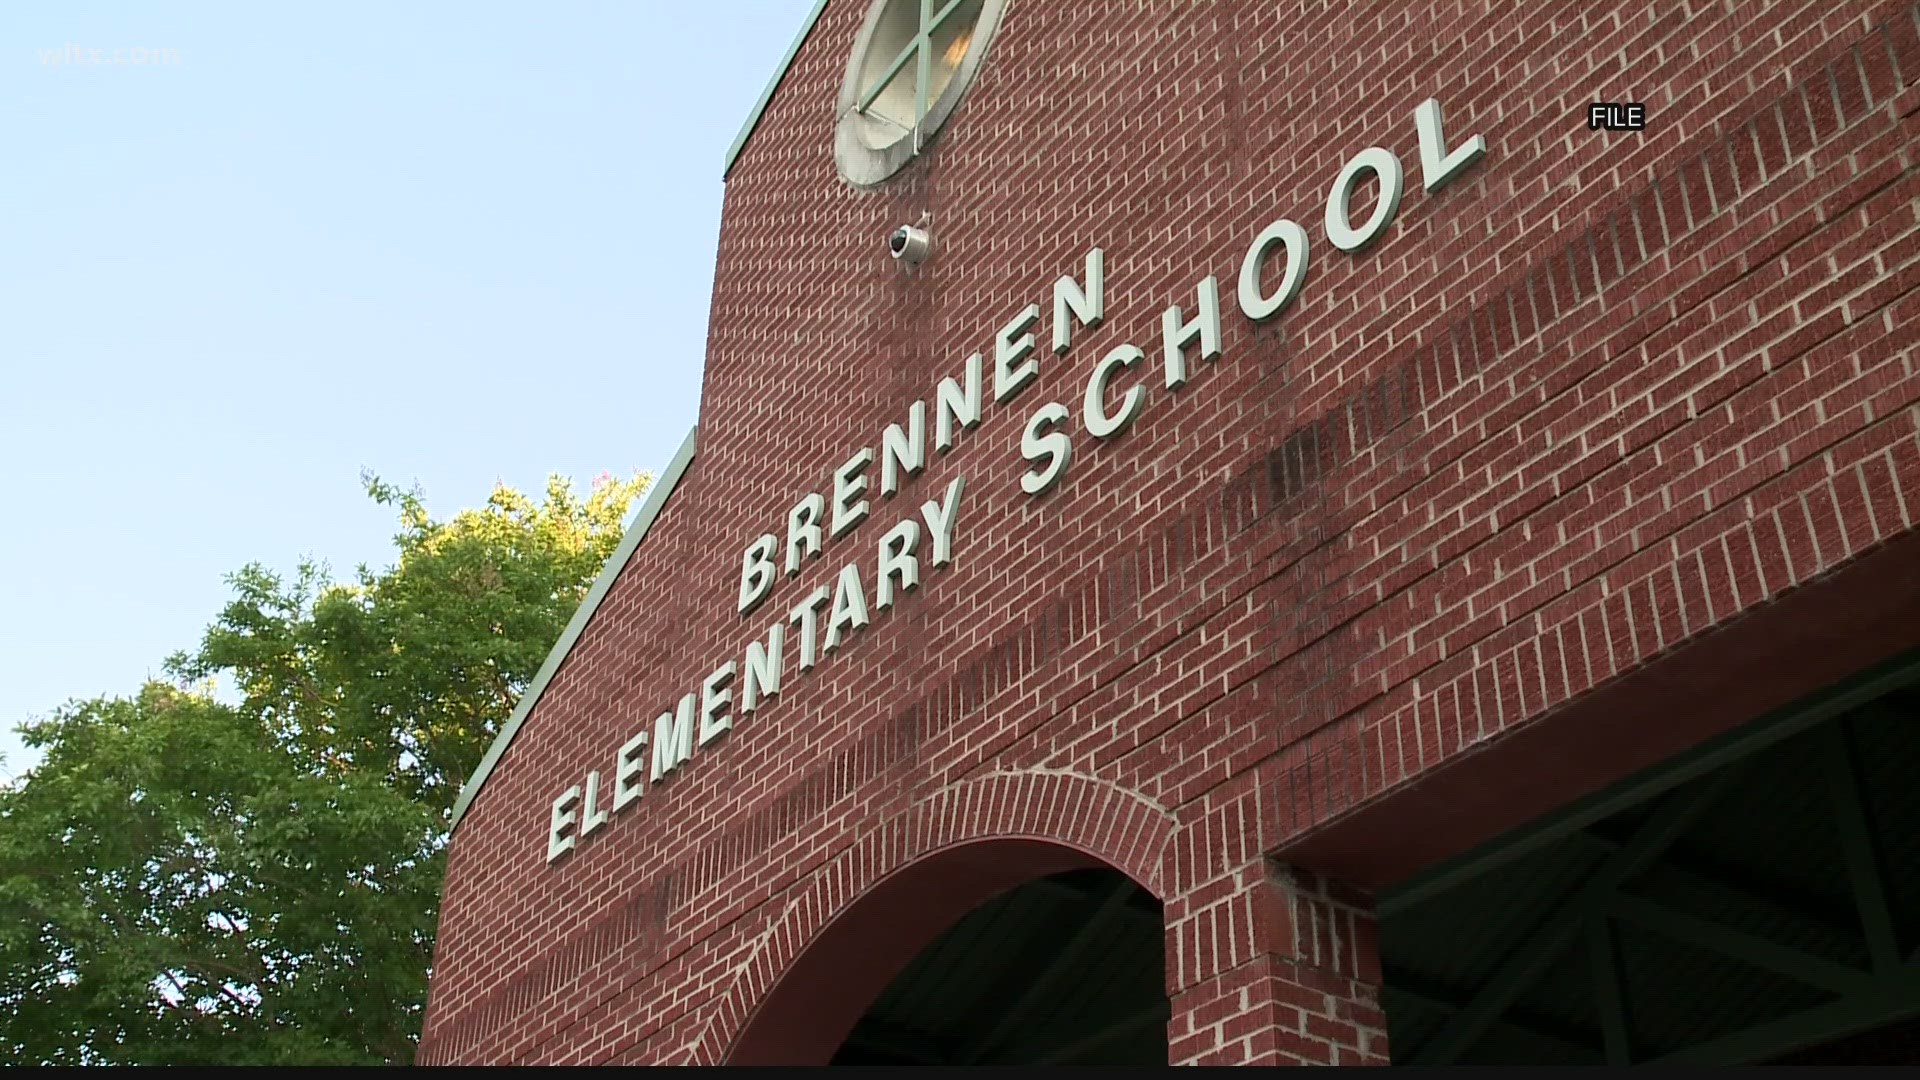 Students at Brennen Elementary School will be in e-learning on Friday due to what the school is calling "an unknown odor in parts of the building."